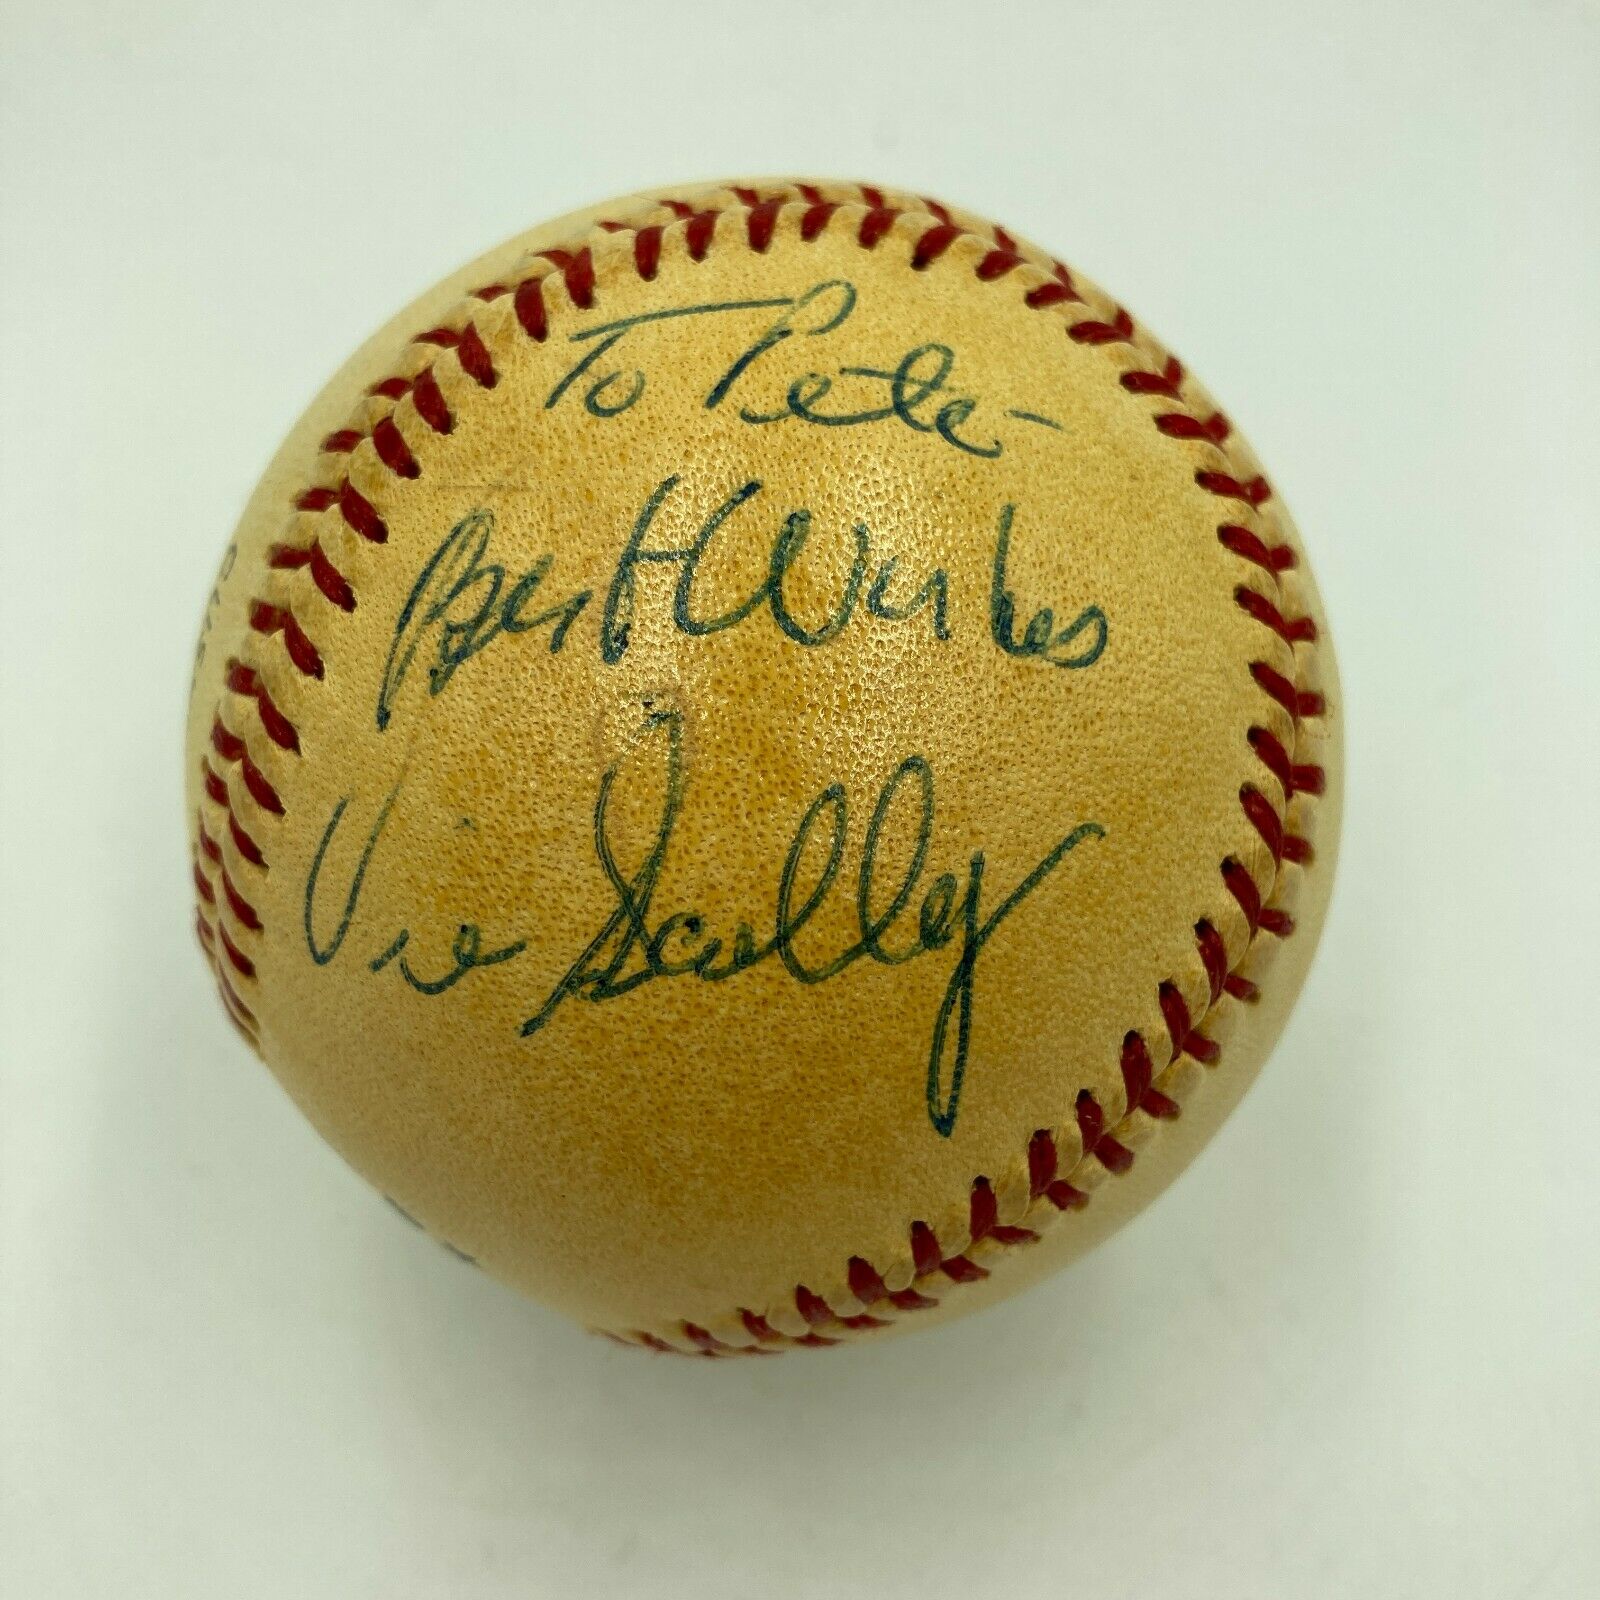 Vin Scully Autographed Baseball